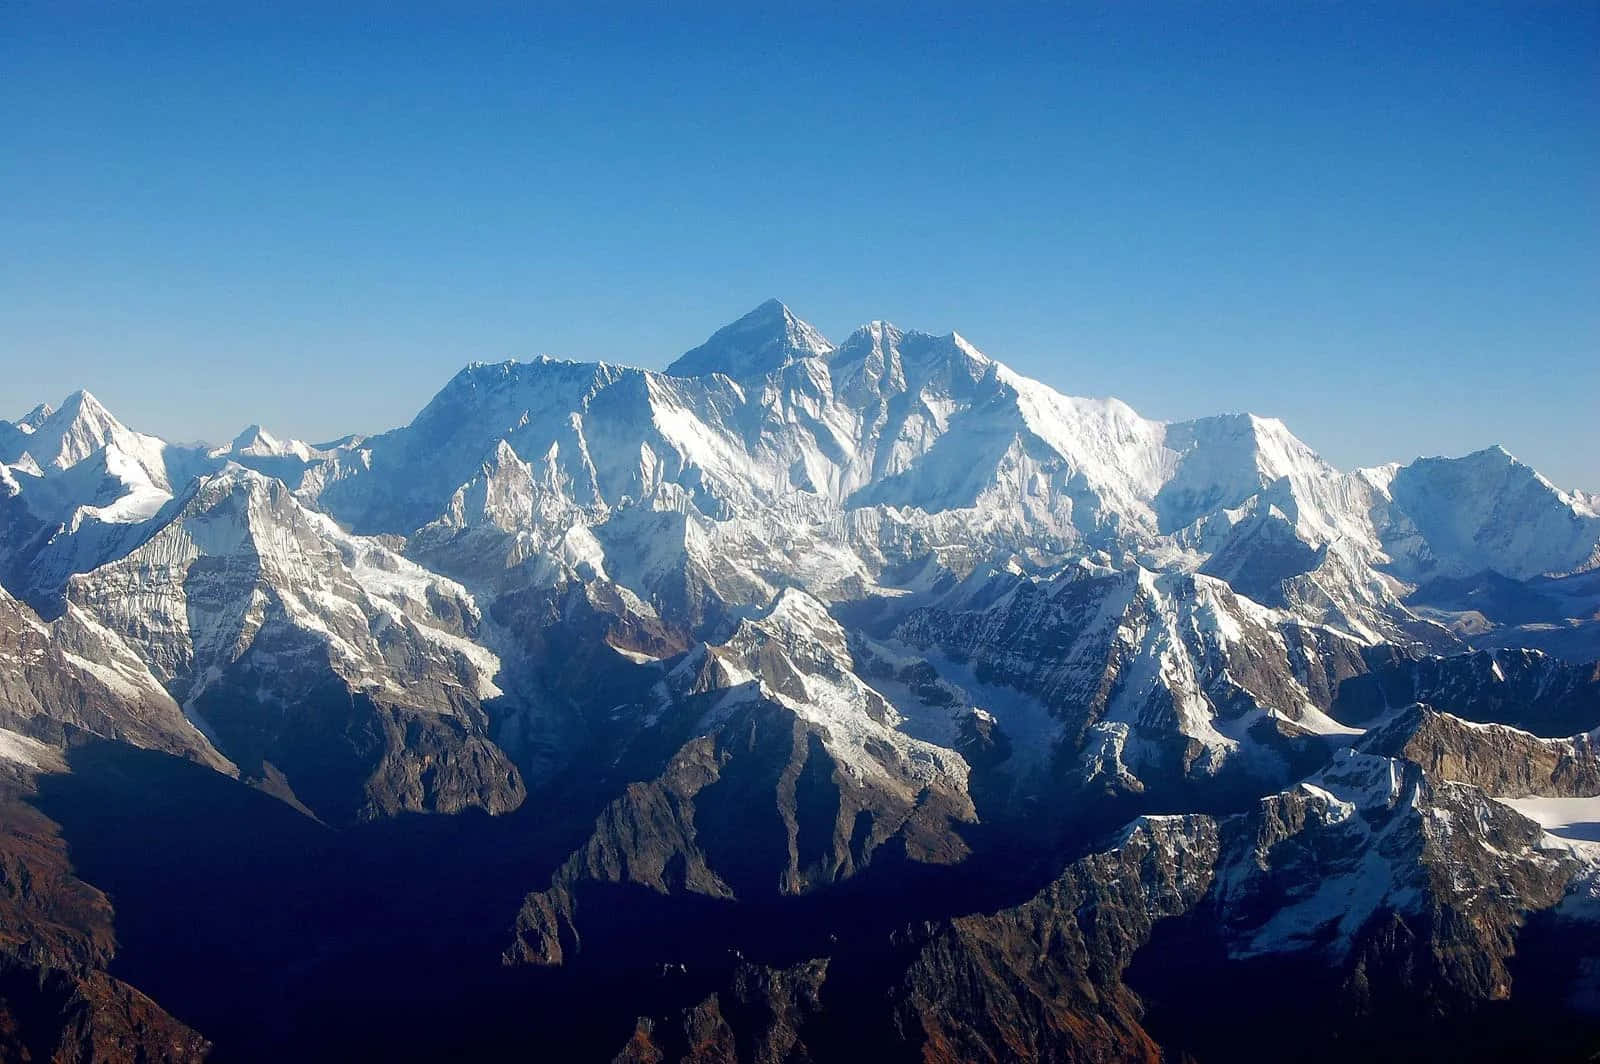 Stand atop the world's highest peak - Mount Everest.